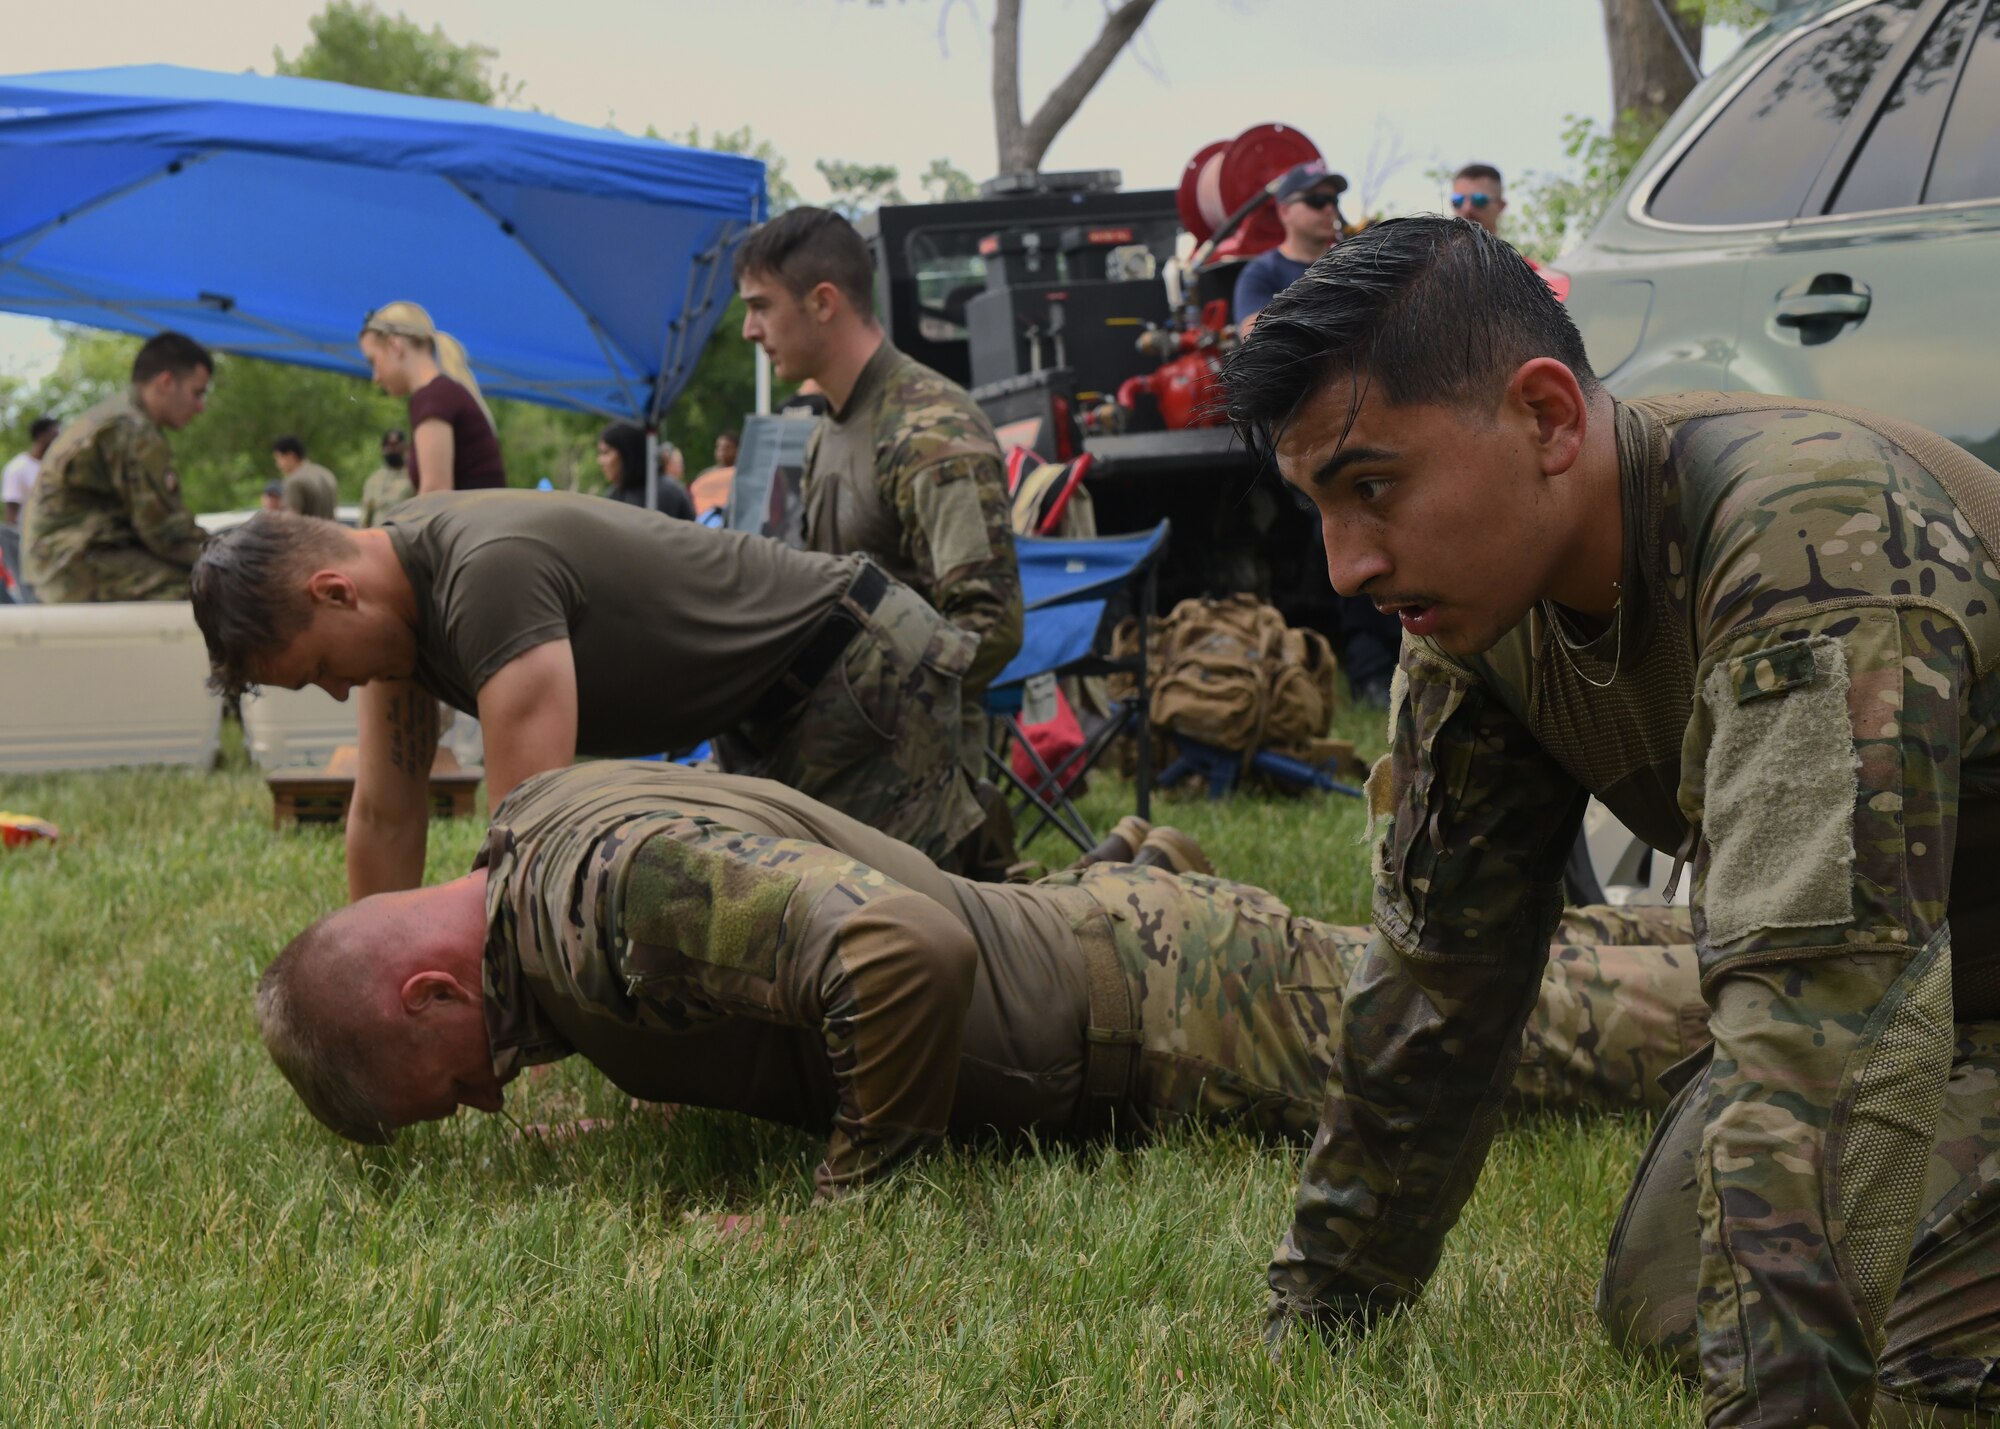 Members with the 90th Security Forces Group perform pushups during the Crow Creek Challenge, July 8th, 2022, at F.E. Warren Air Force Base, Wyo. The crow creek challenge pushed Airmen to test their physical and mental readiness. (U.S. Photo by Senior Airman Darius Frazier.)